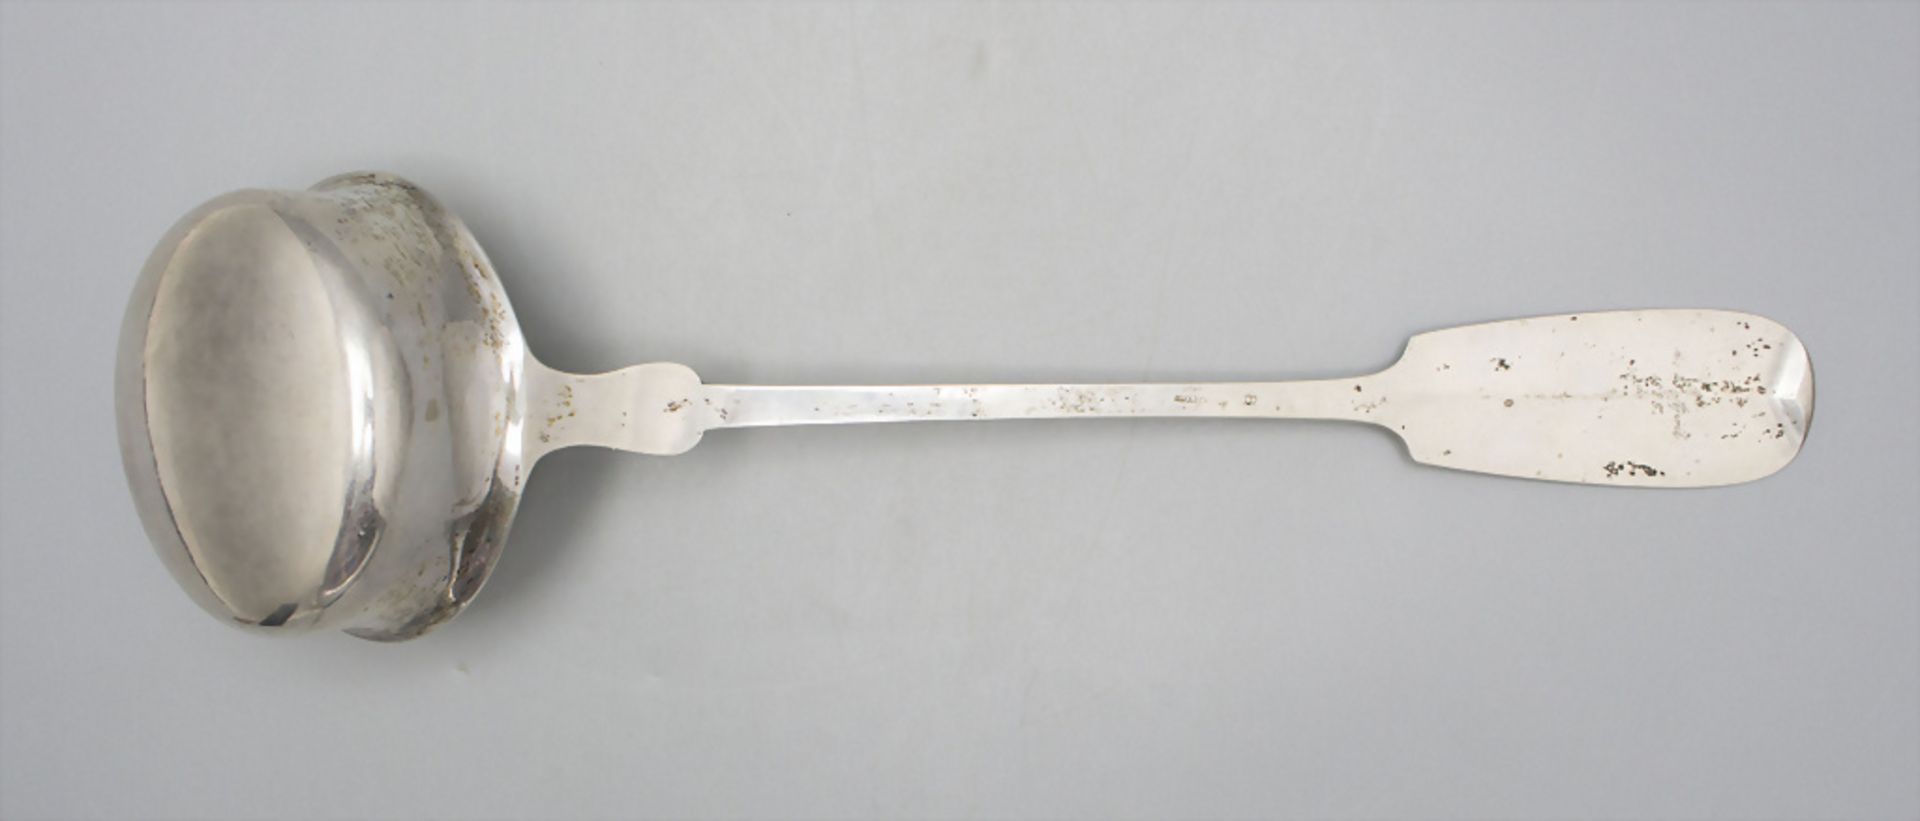 Suppenkelle / A soup ladle, Danzig, um 1850/60 - Image 3 of 4